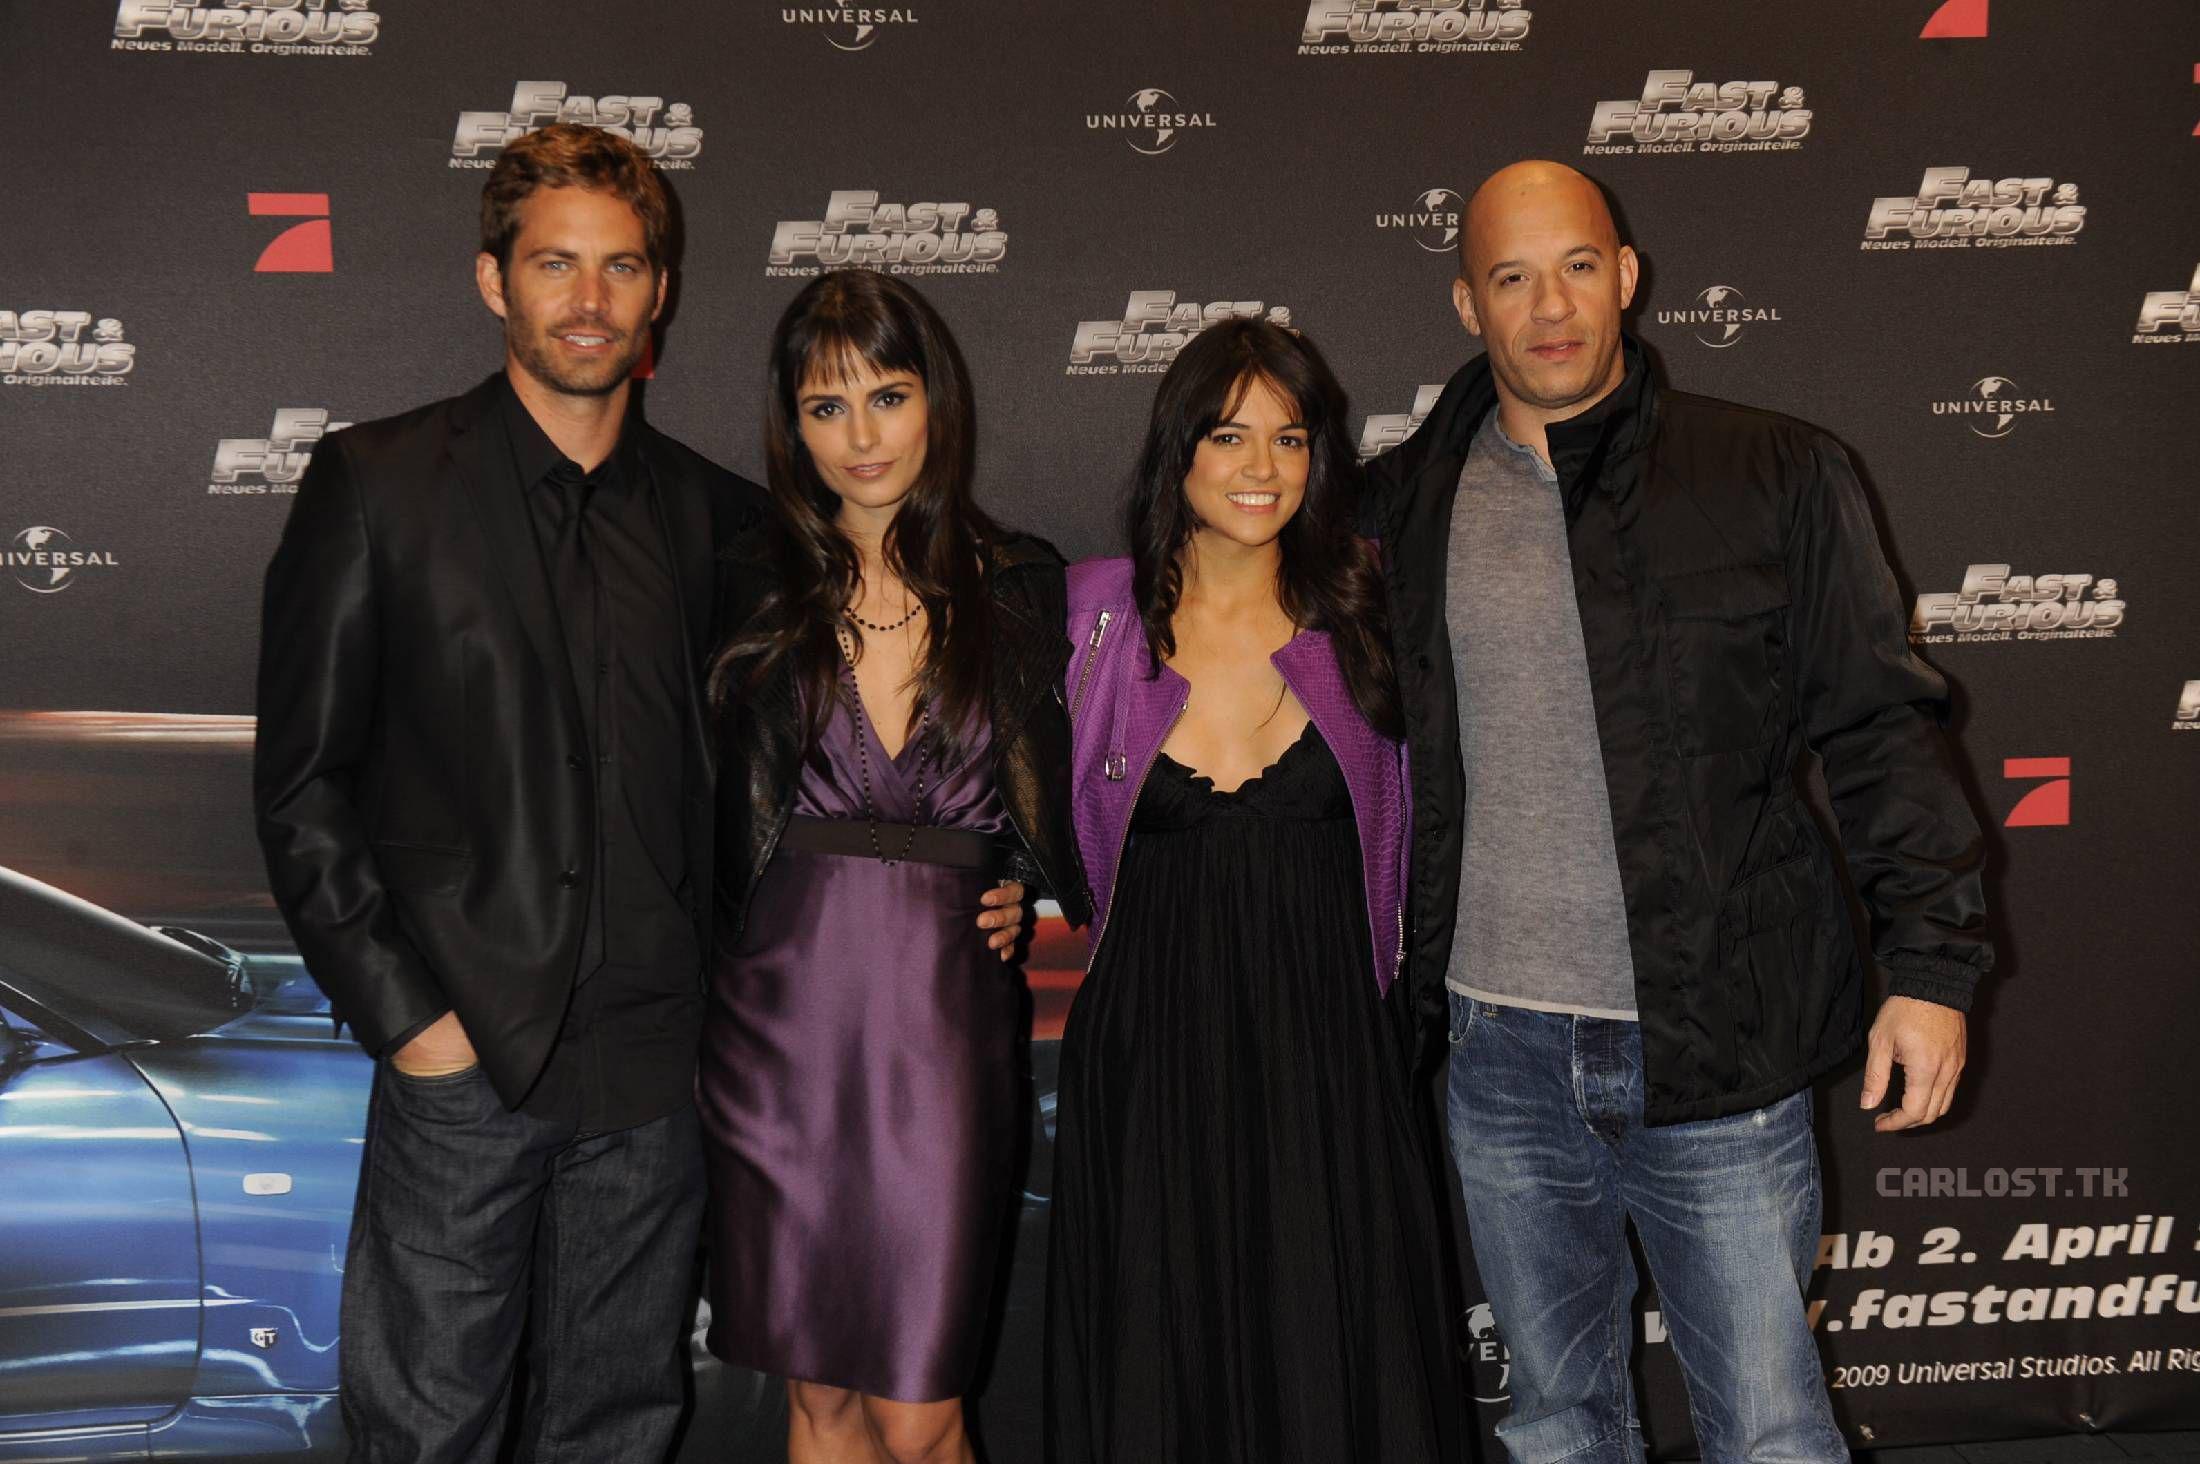 _and_Furious_bycarlost.blogspot.com_Premiere_Alemania_04.jpg